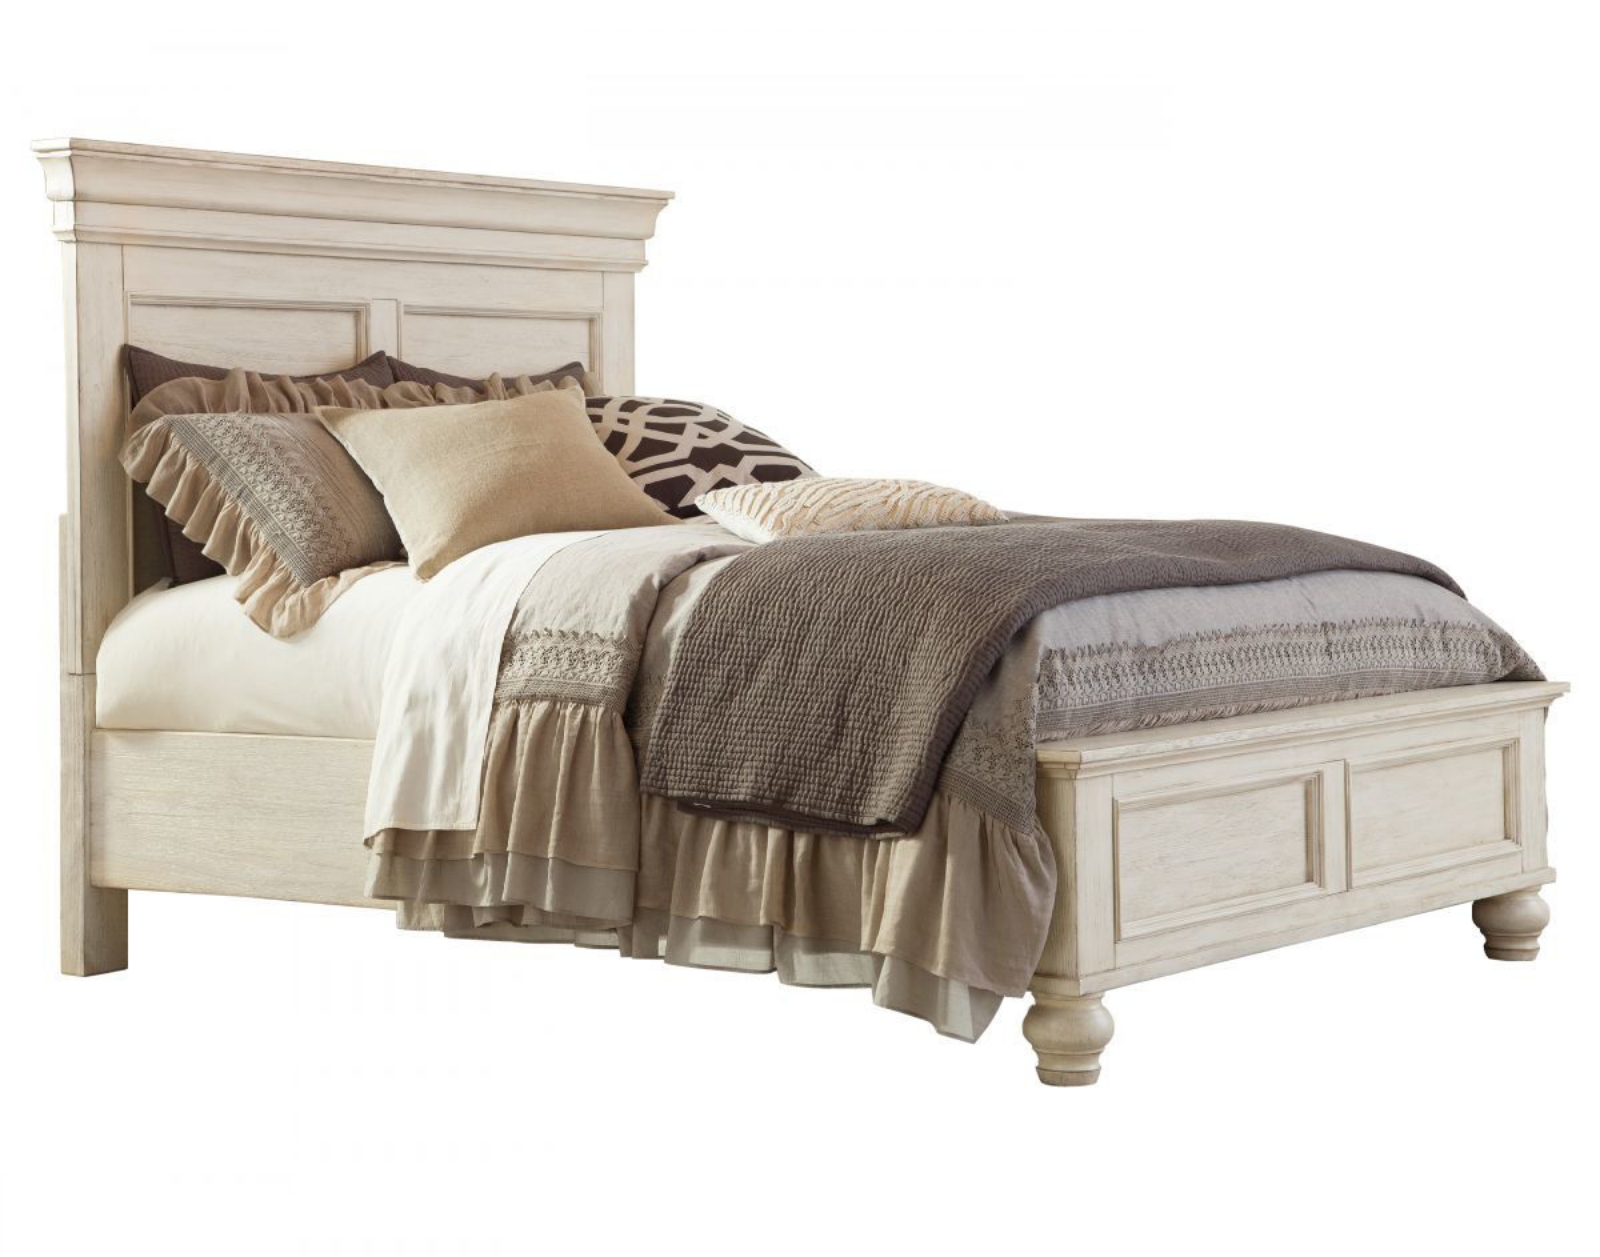 Picture of Marsilona King Size Bed